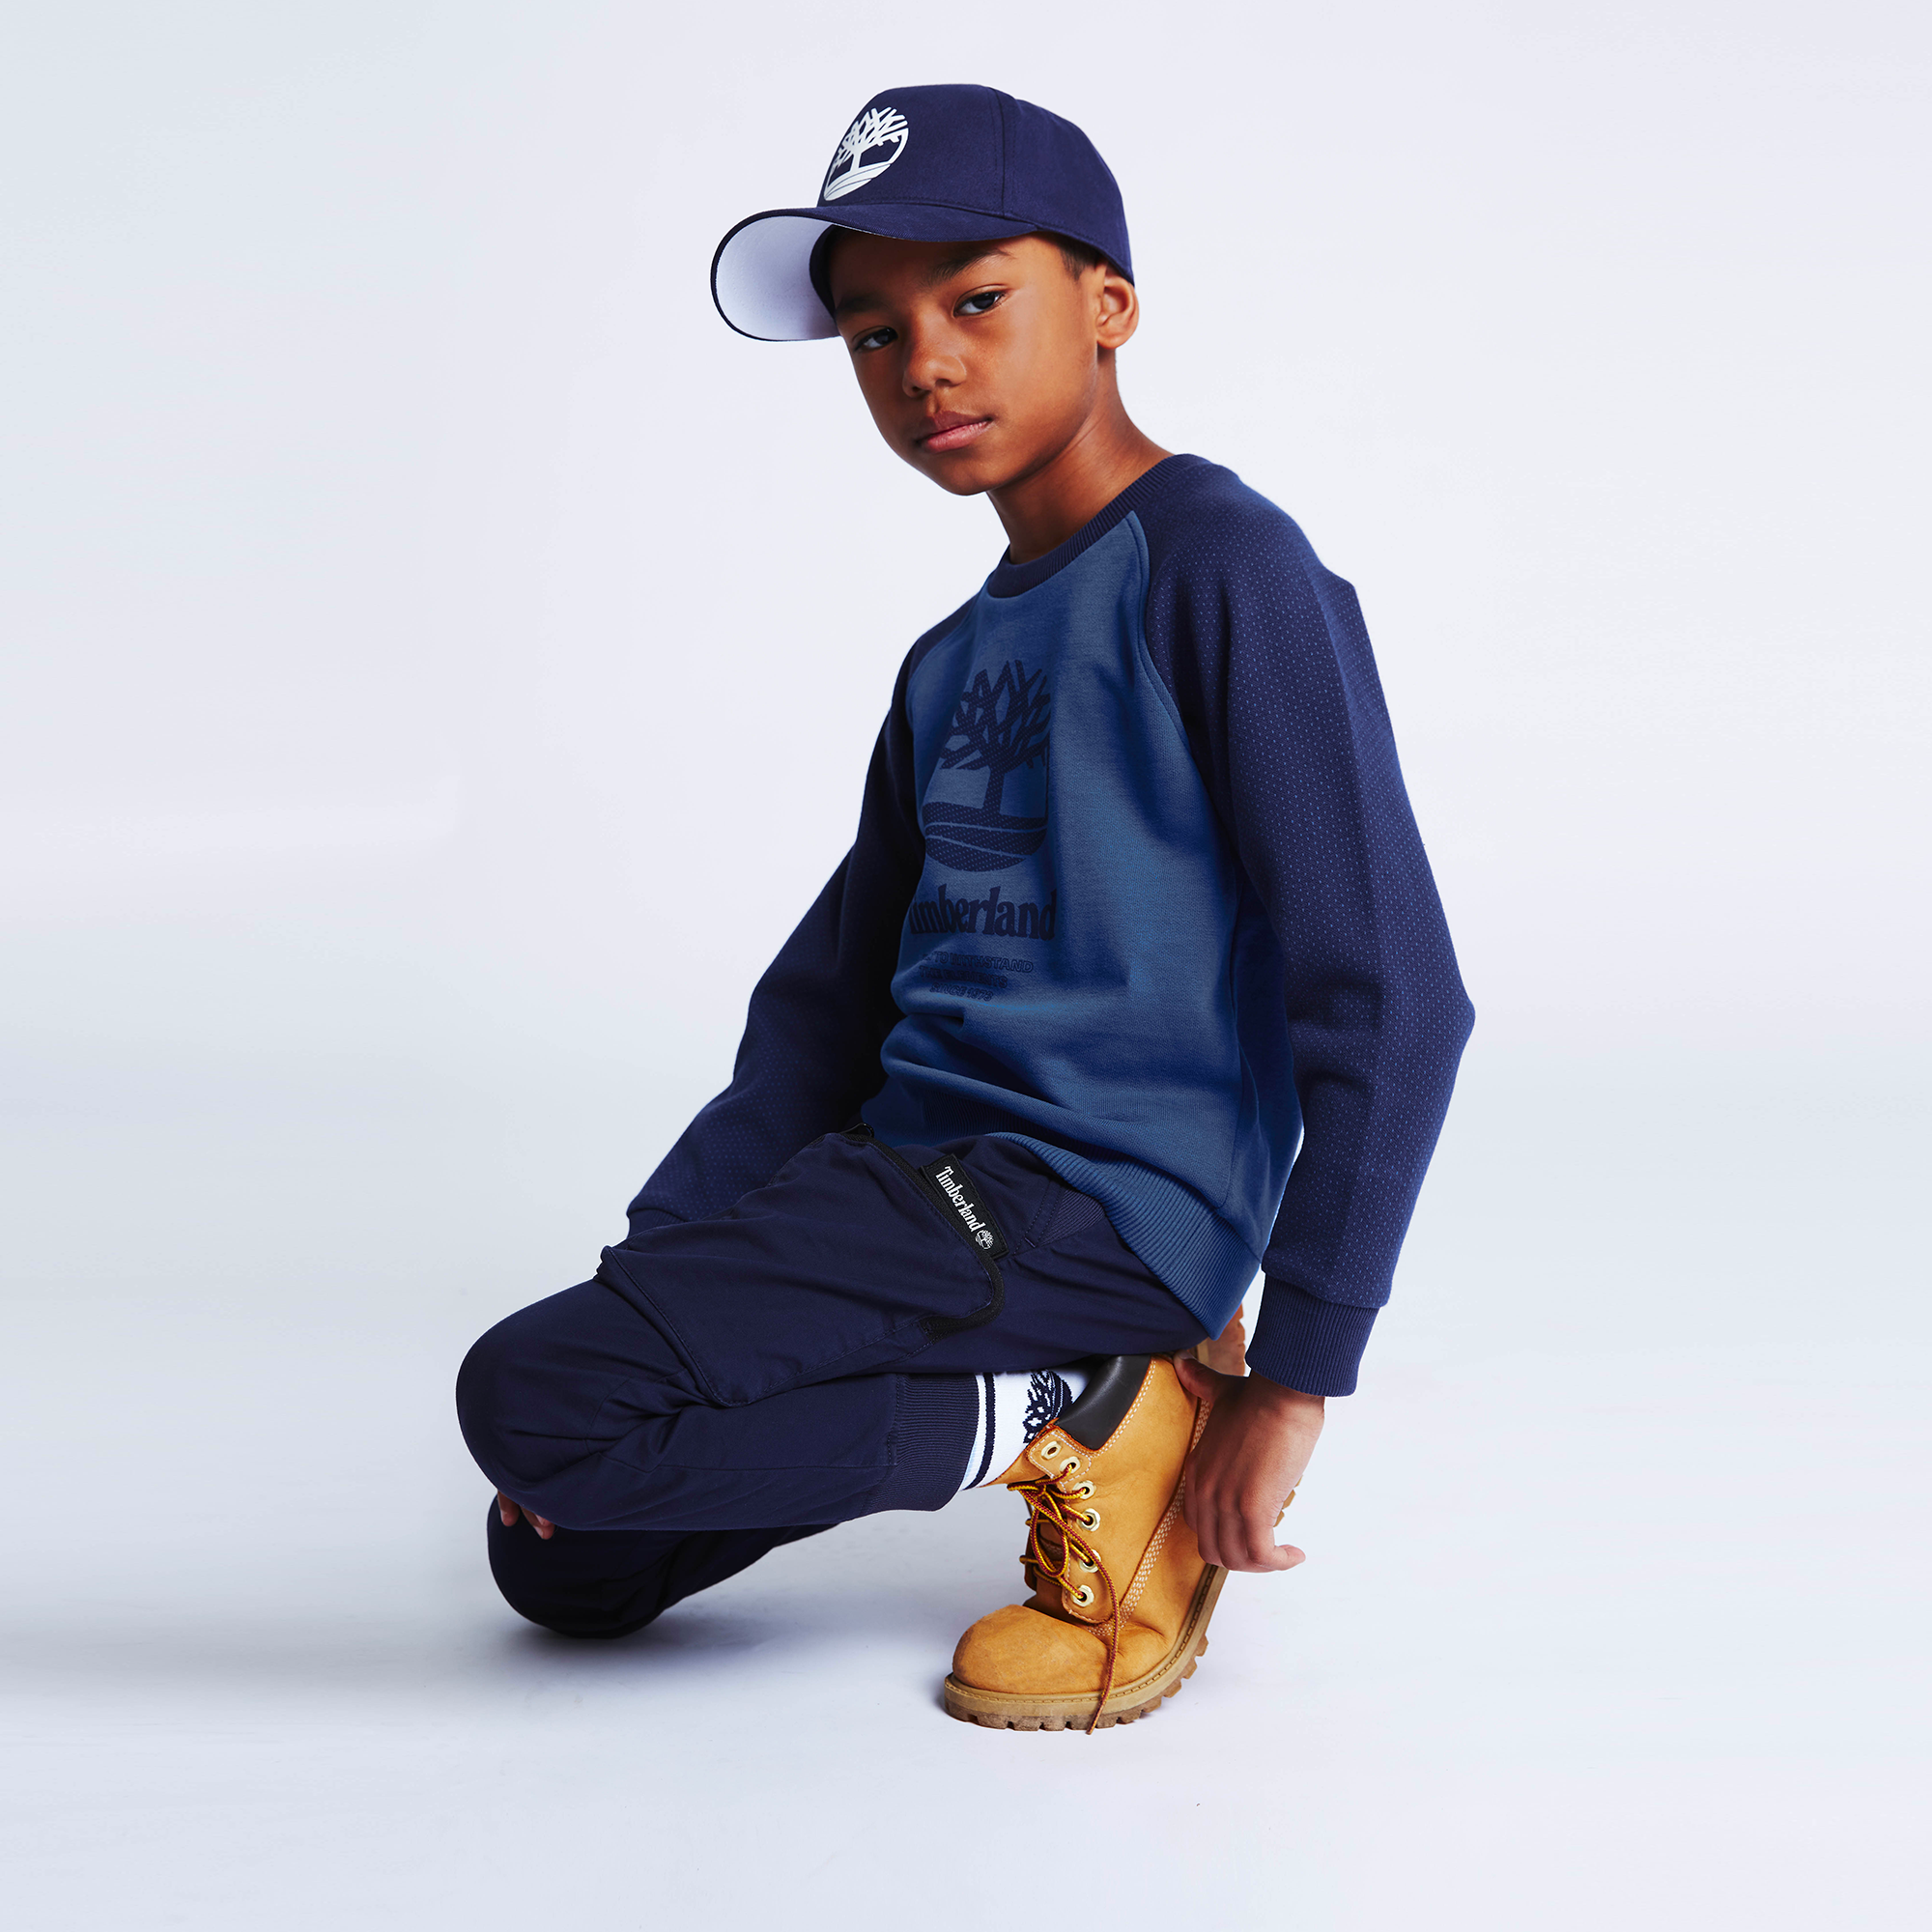 Adjustable cotton cap TIMBERLAND for BOY